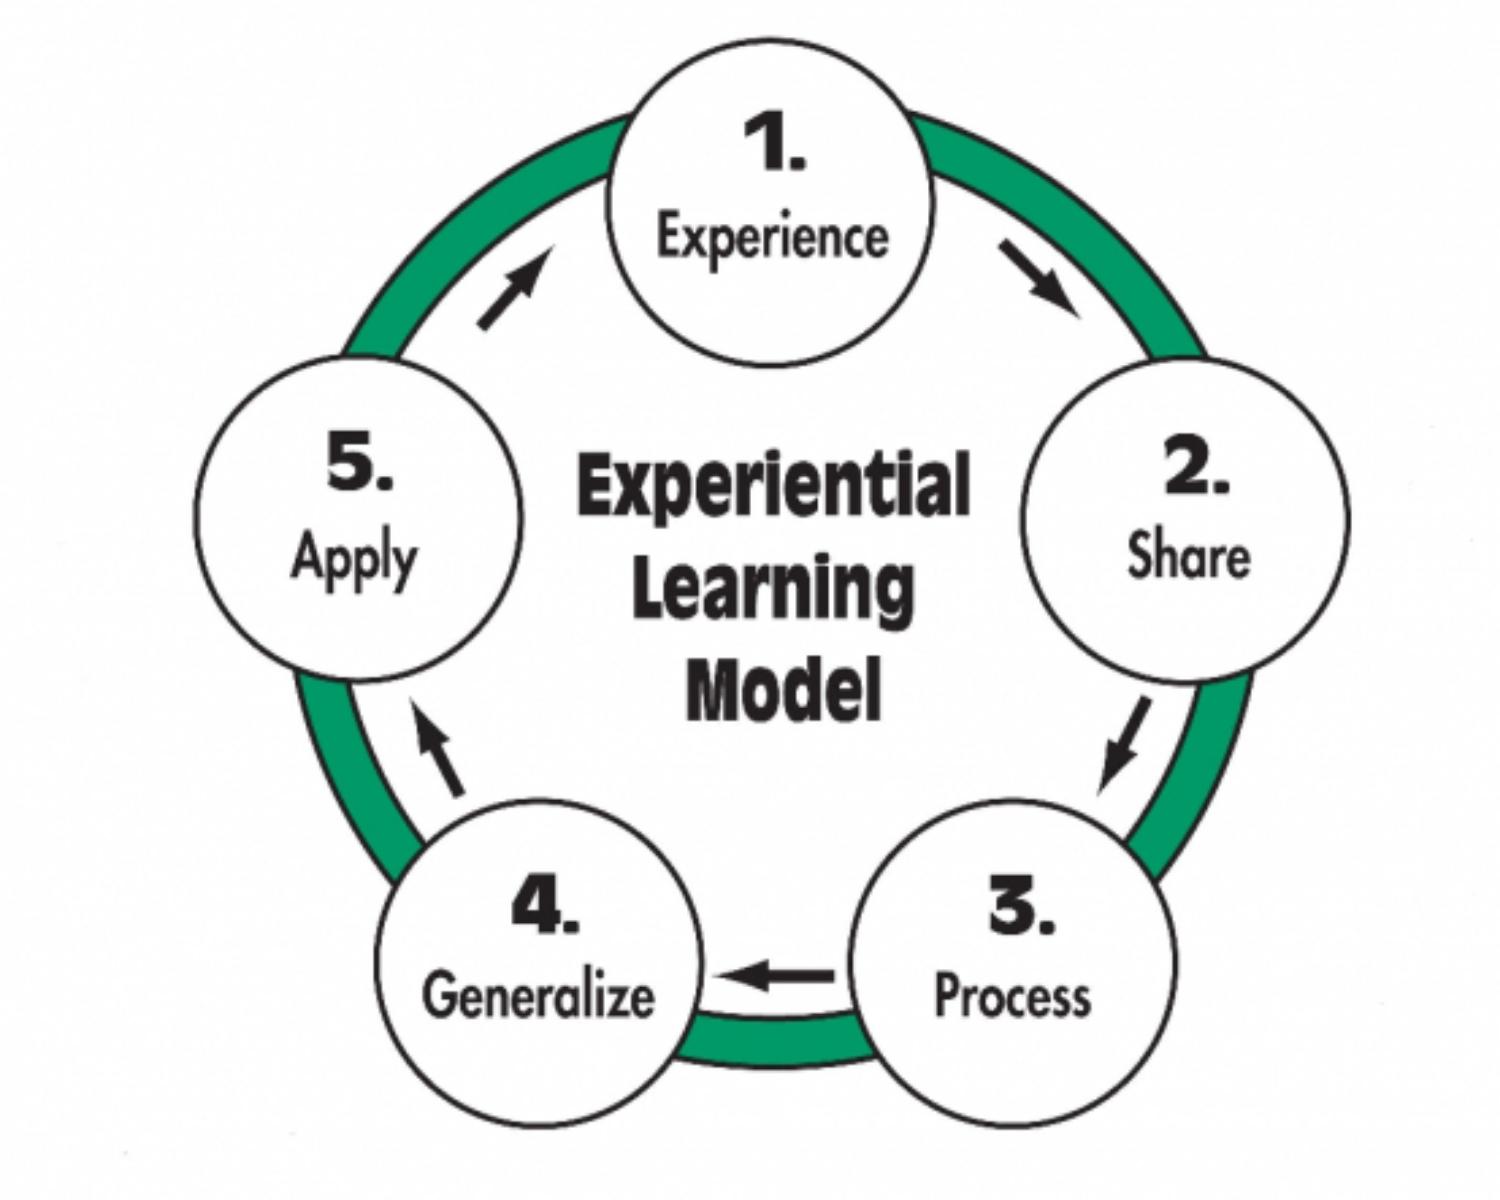 Experiential learning: 